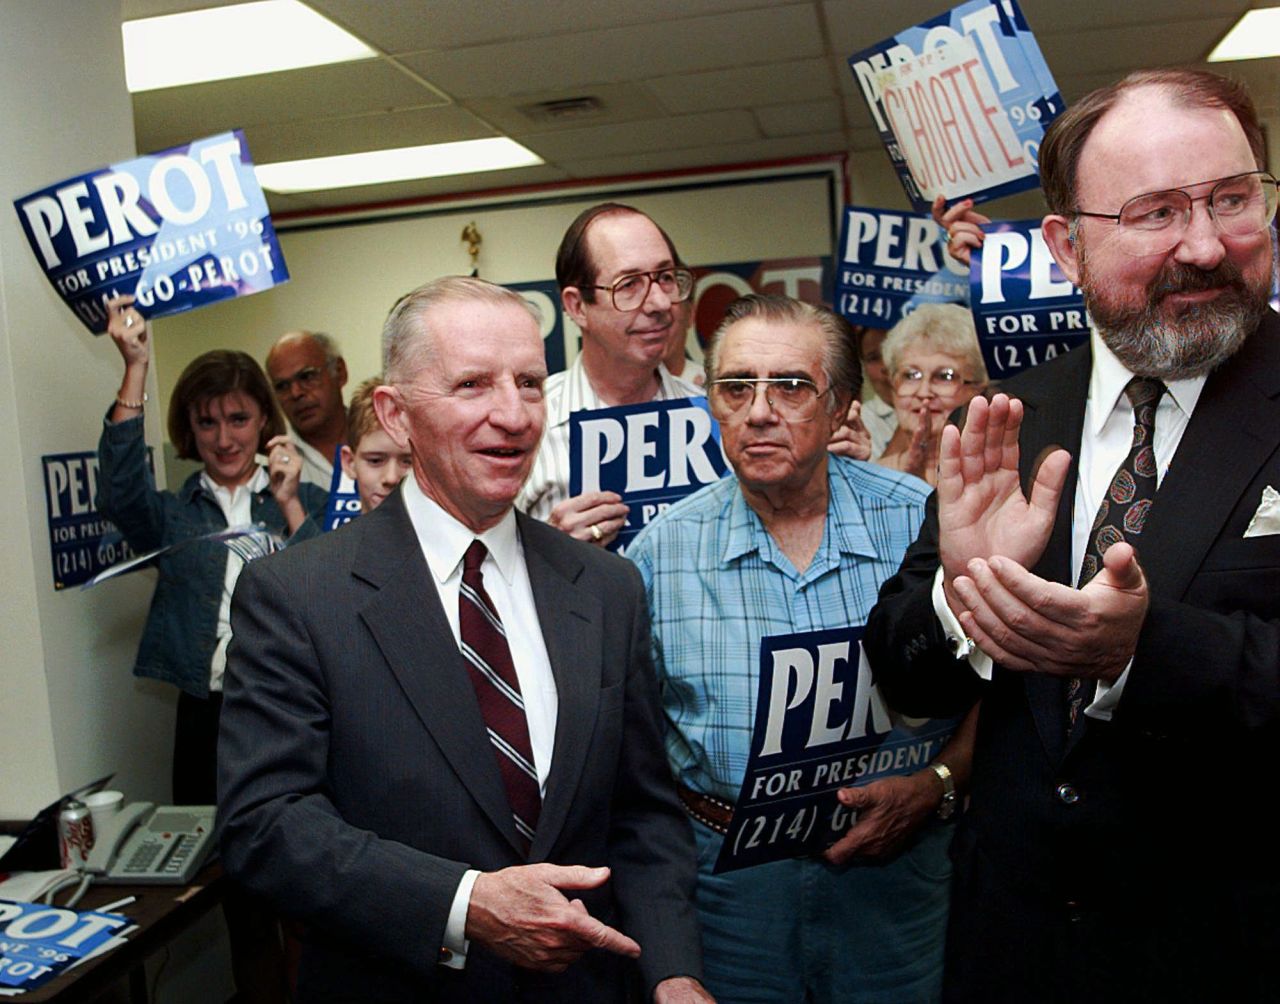 Perot introduces running mate Pat Choate, right, to campaign volunteers in September 1996. James Stockdale was Perot's running mate in 1992.